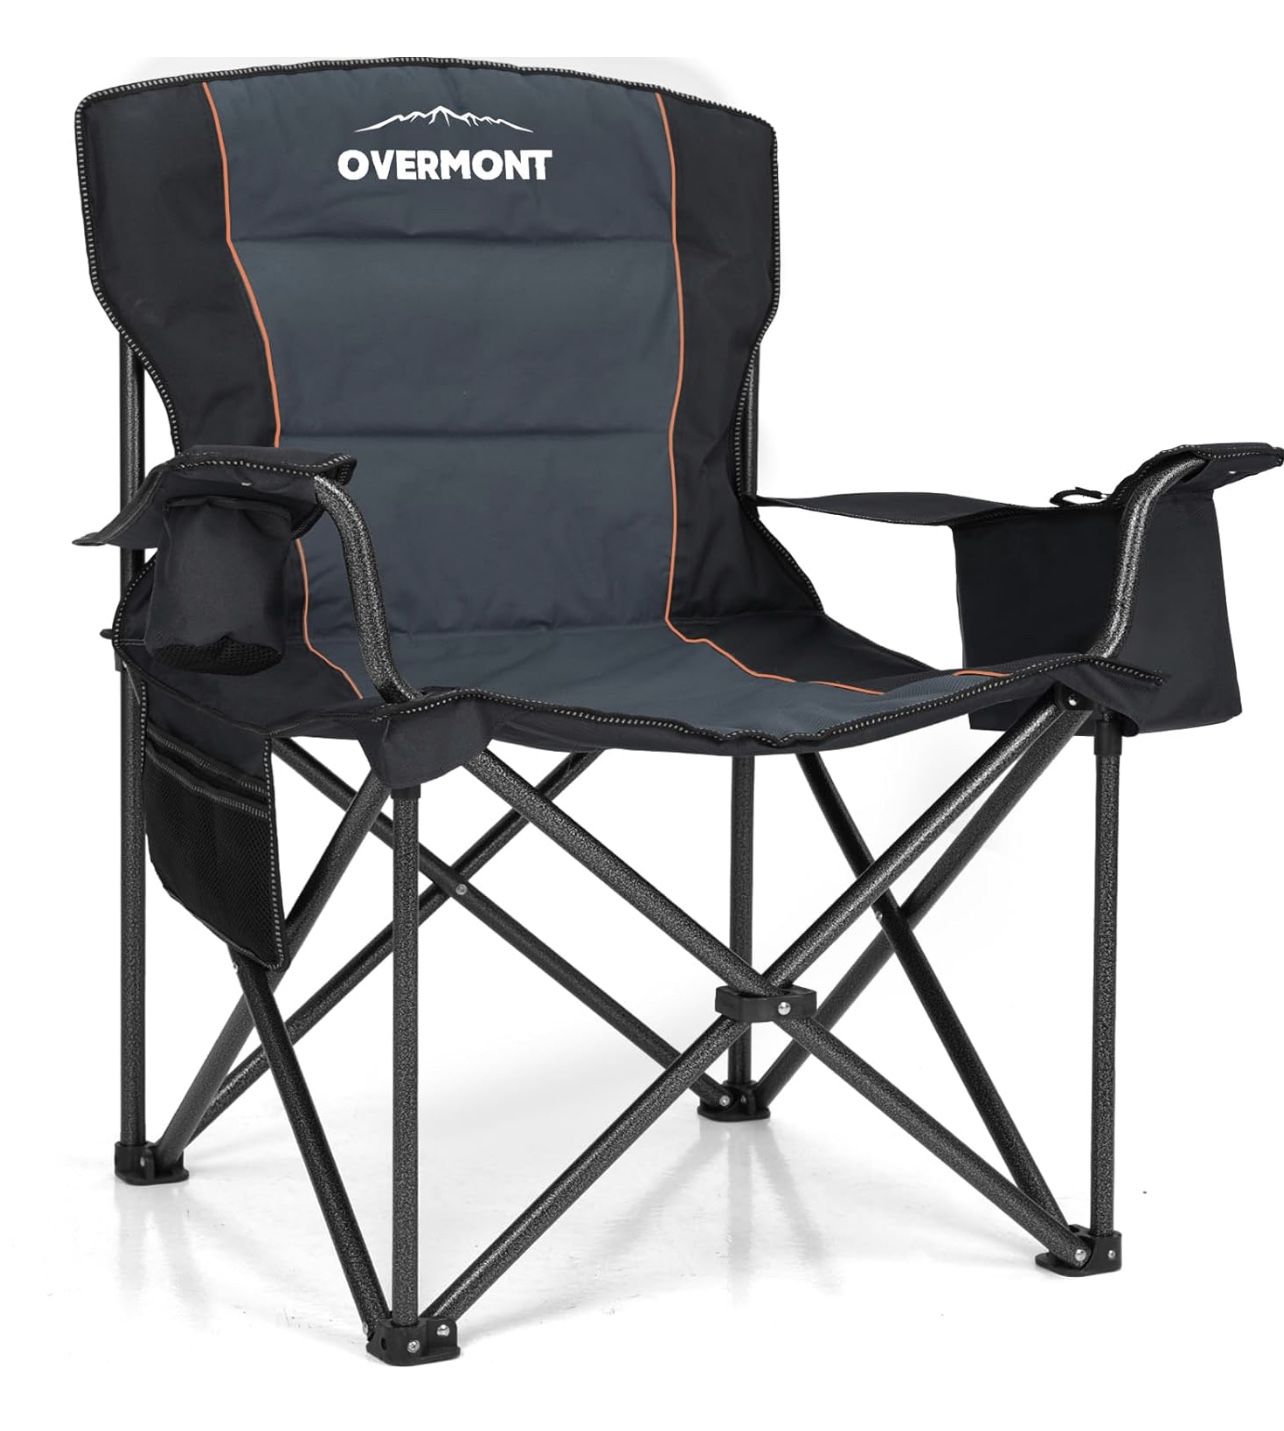 Overmont Oversized Folding Camping Chair - 450lbs Support with Padded Cushion Cooler Pockets - Heavy Duty Collapsible Chairs for Sports Garden Beach F